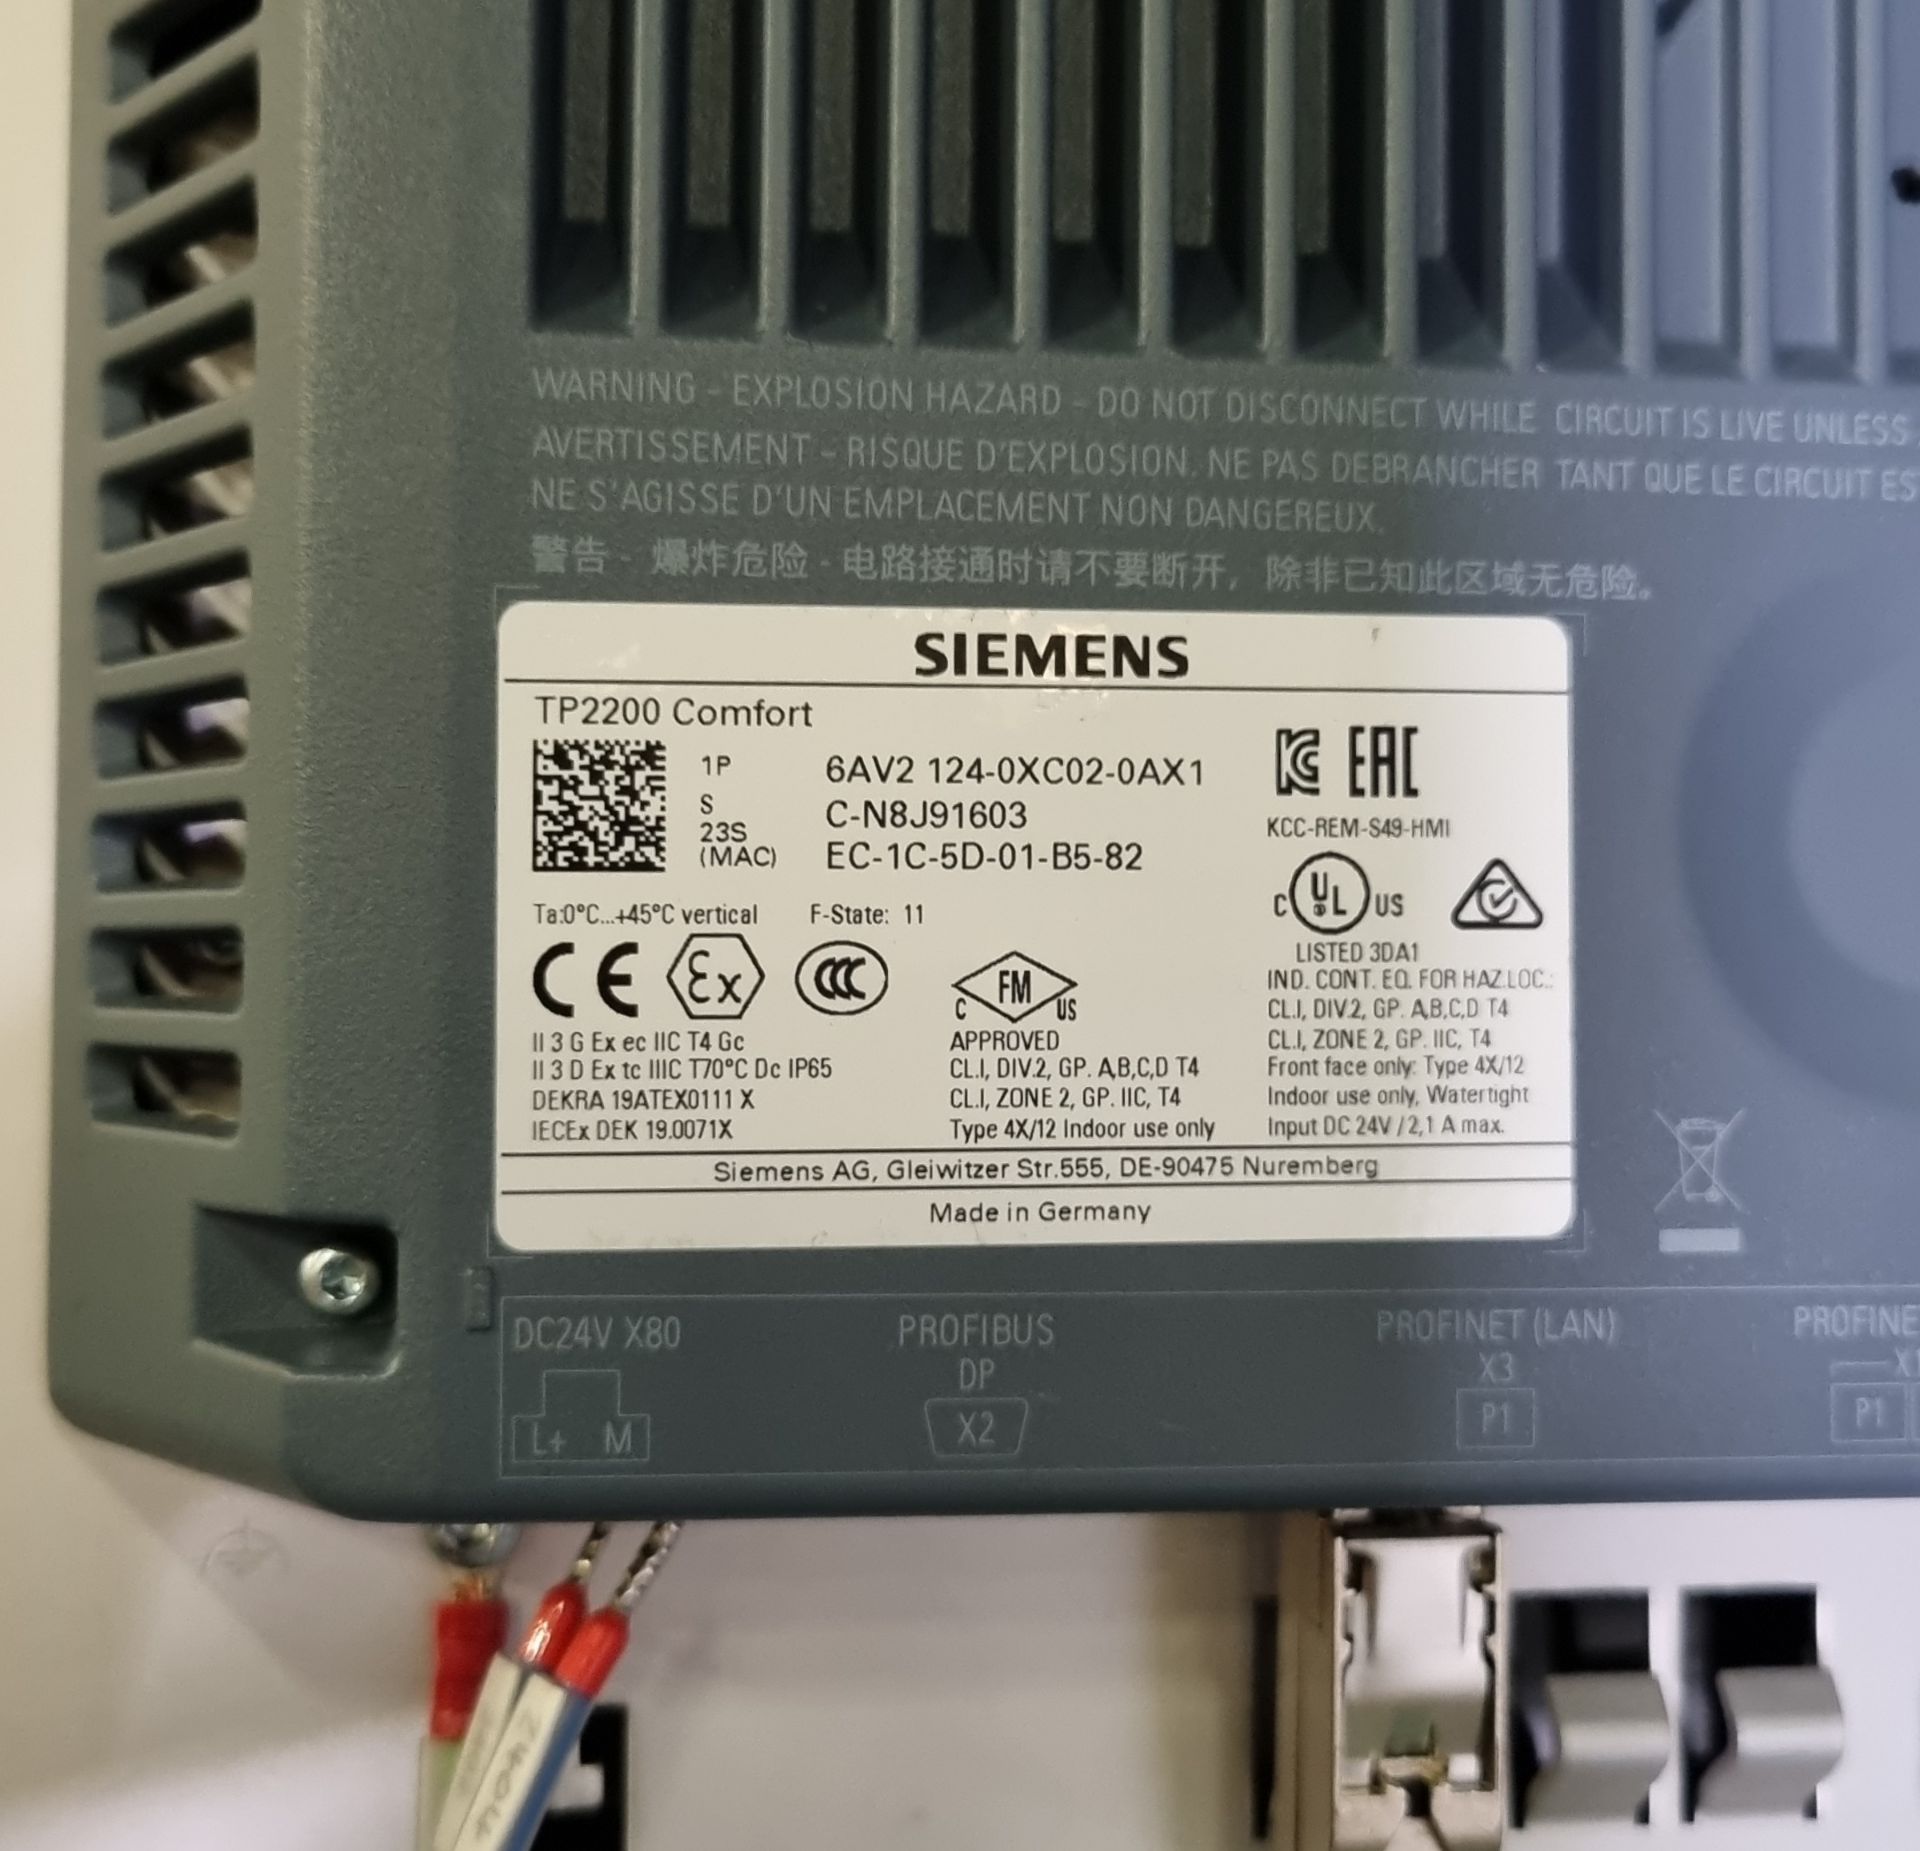 Siemens Power supply unit with siemens simatic Hmi touch panel in a Rittal VX25 - Image 6 of 10